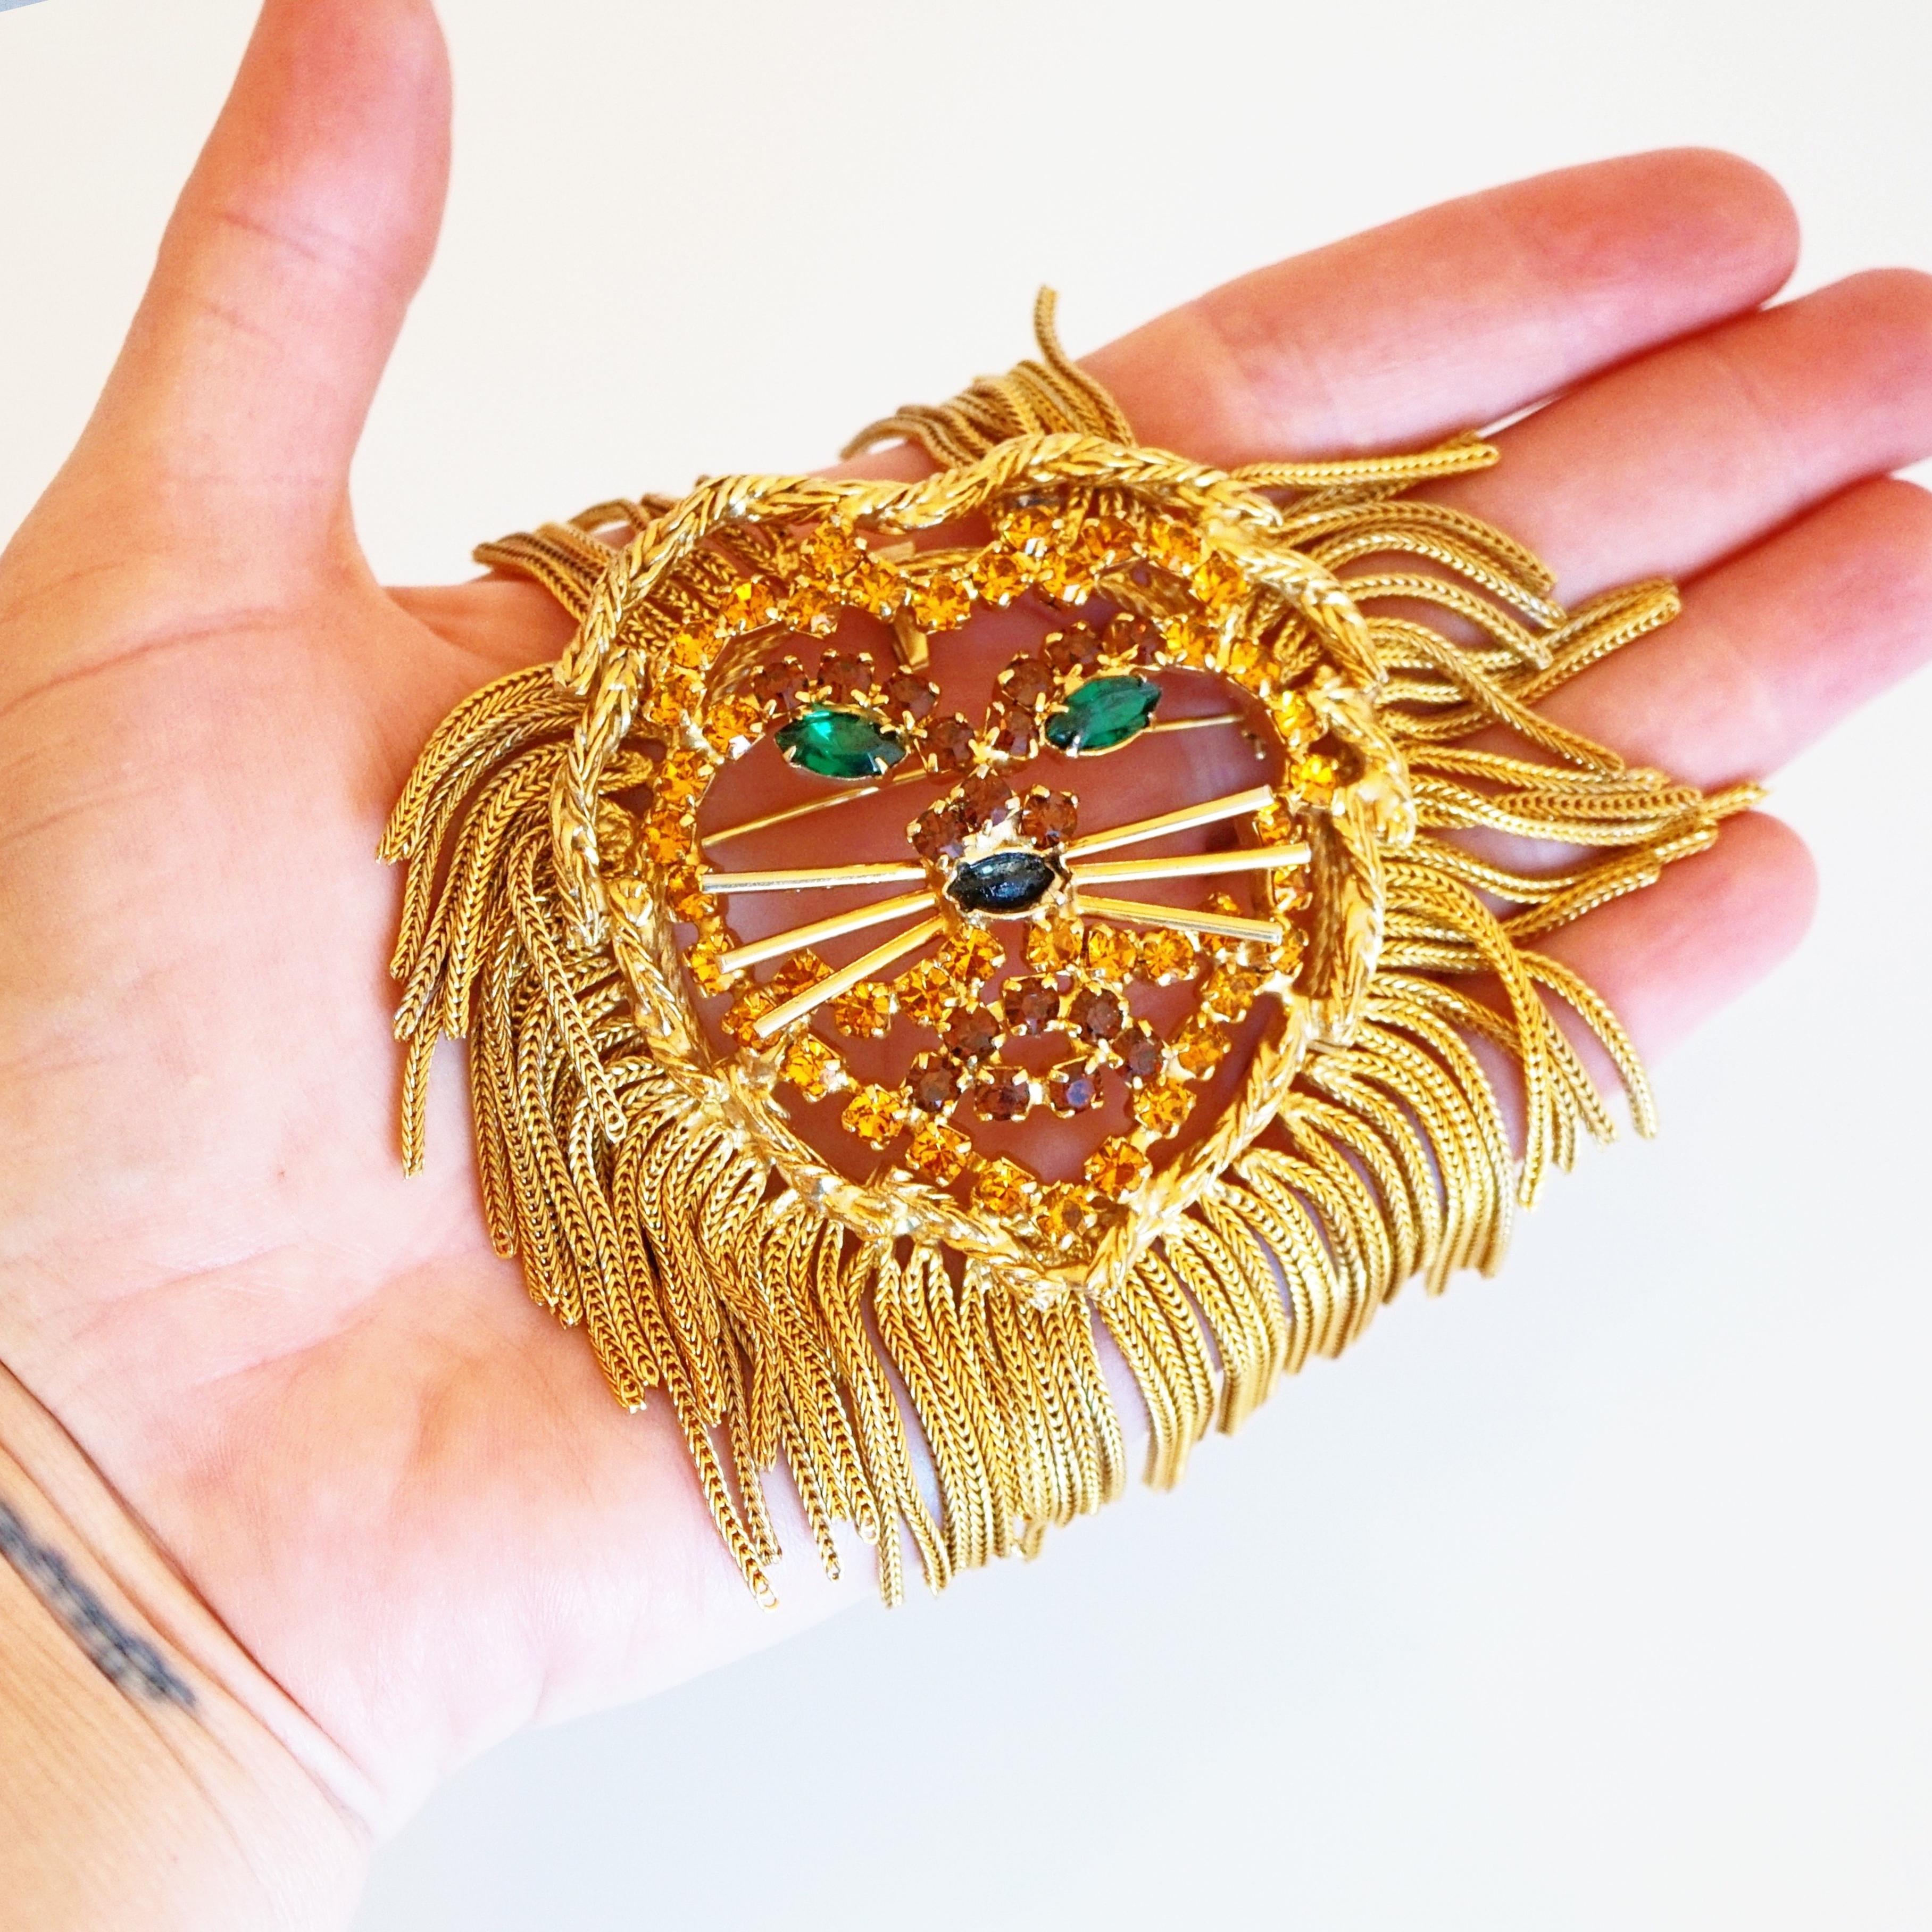 Women's Lion Brooch With Rhinestones and Gold Chain Fringe By Dominique, 1960s For Sale